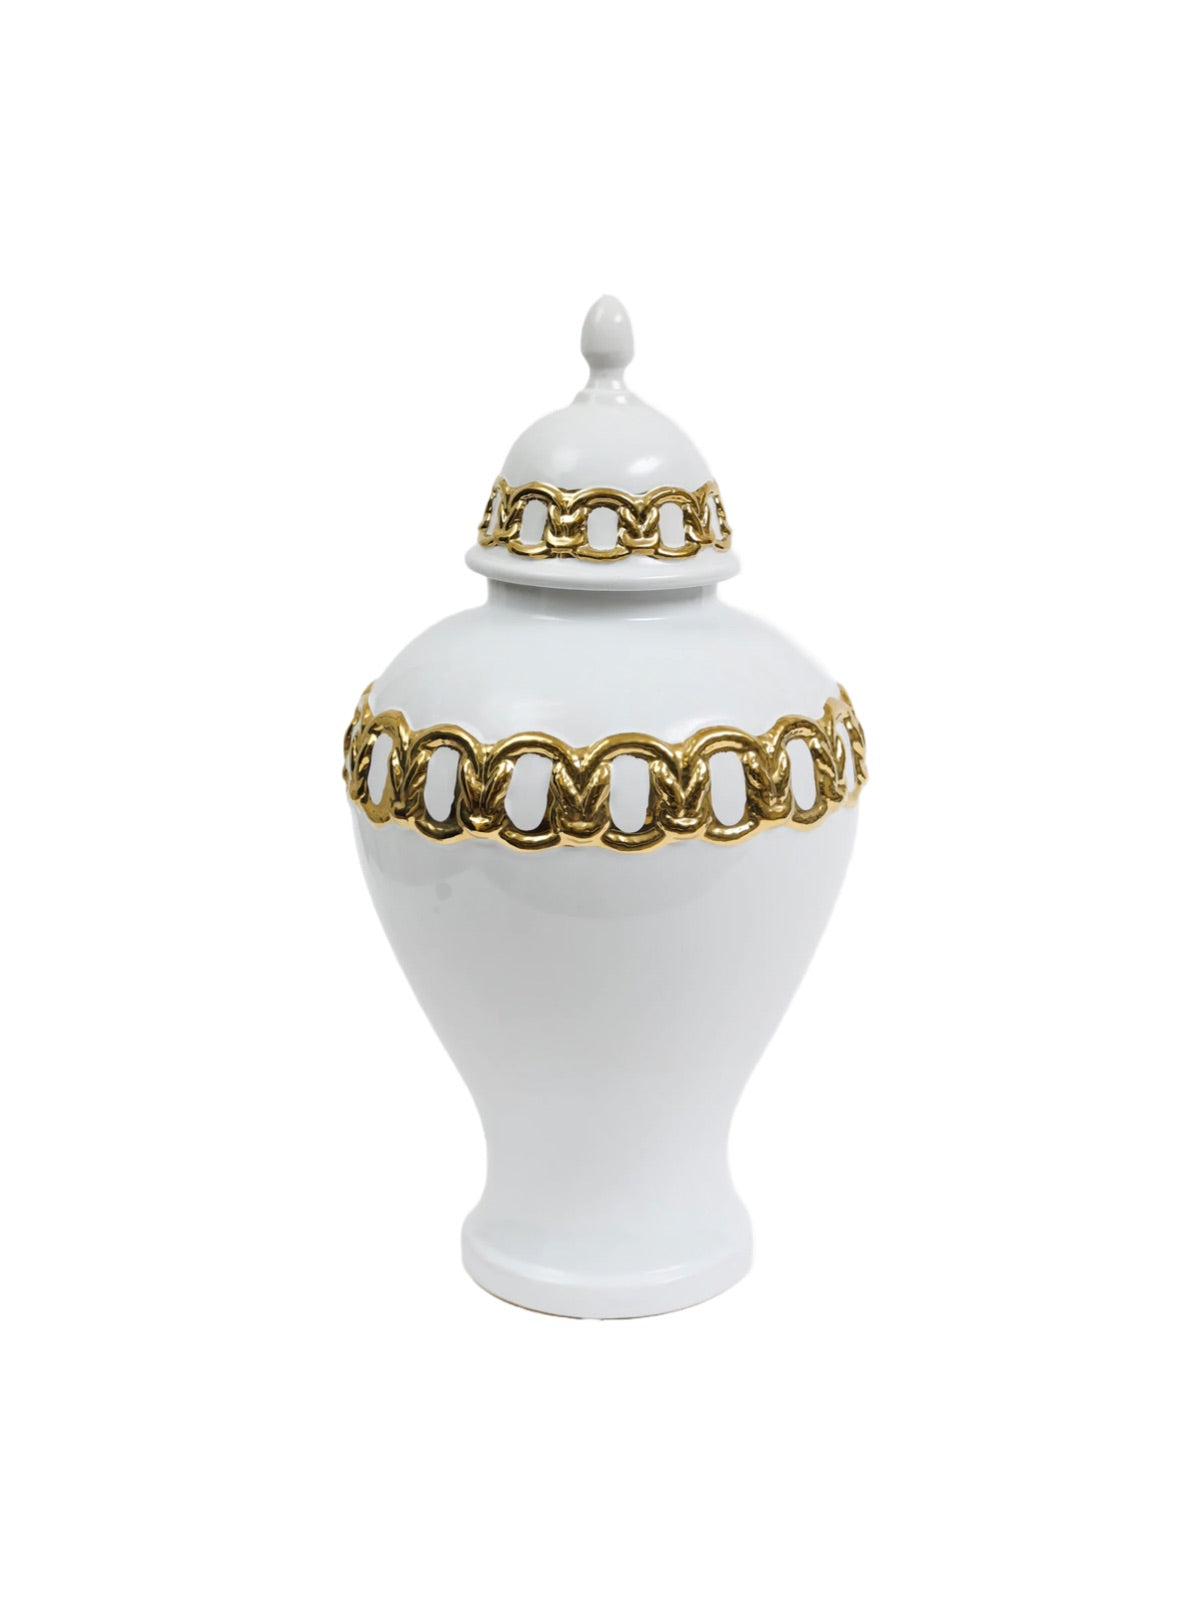 24H White Ceramic Ginger Jar with Gold Chain Details and removable lid. Sold by KYA Home Decor.